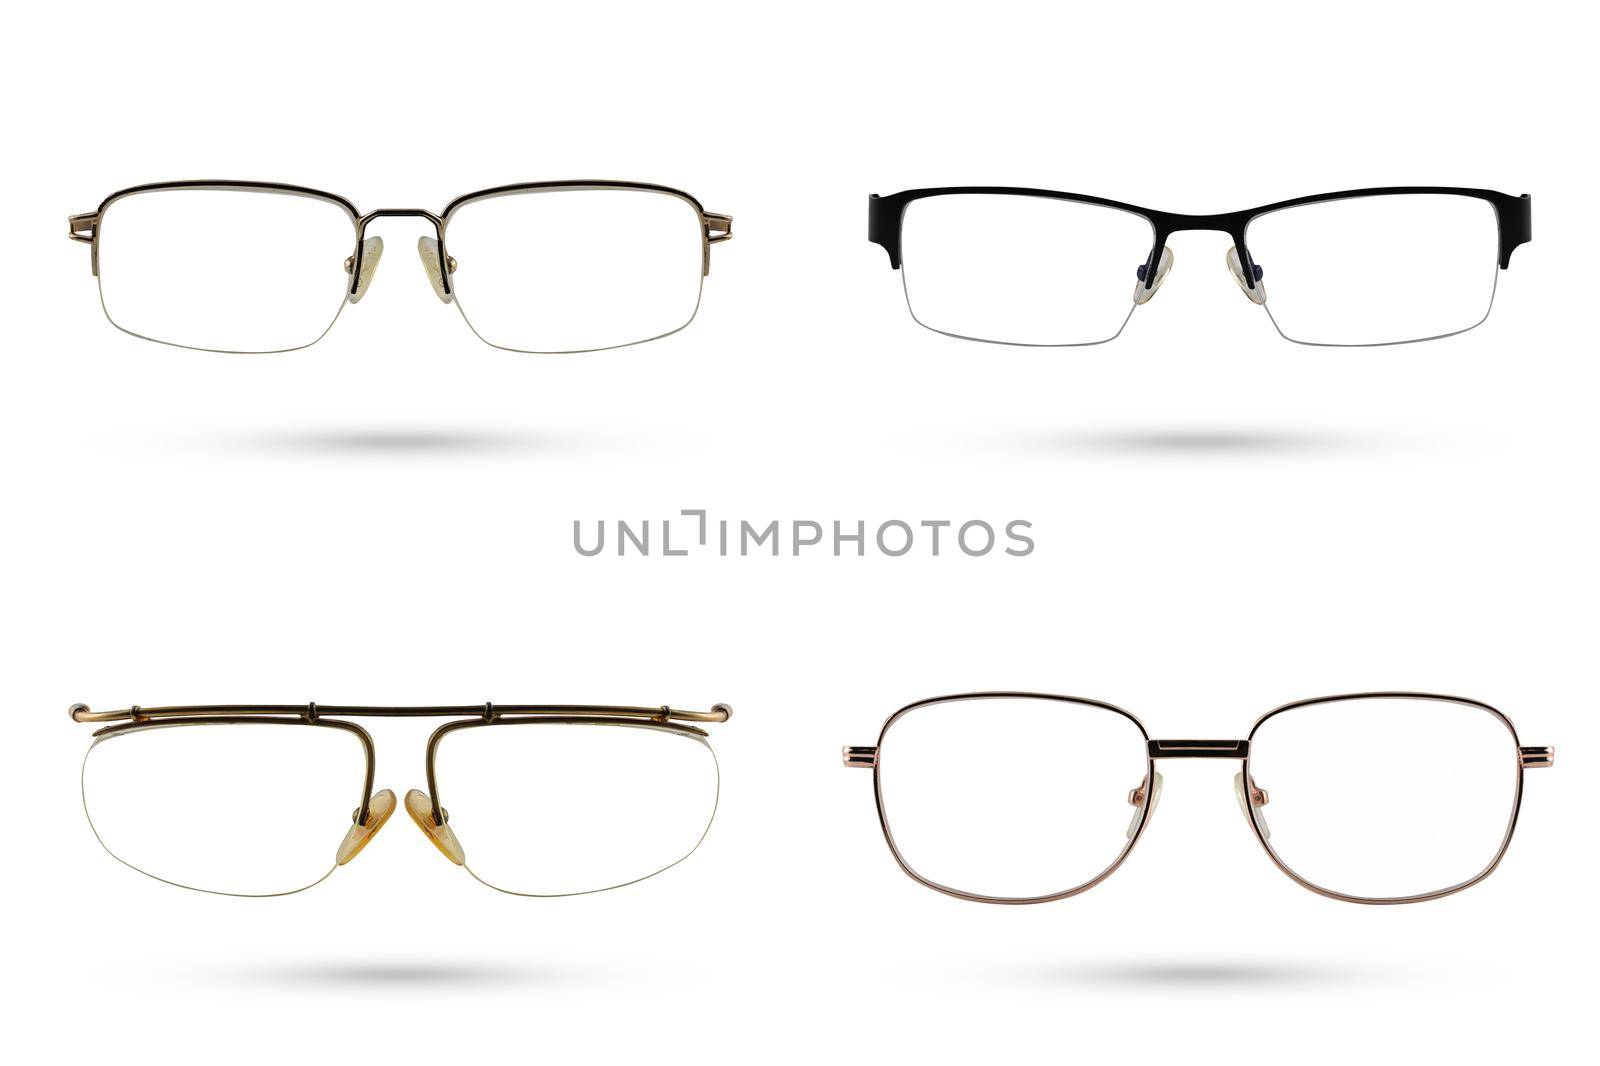 Classic Fashion eyeglasses style collections isolated on white background.